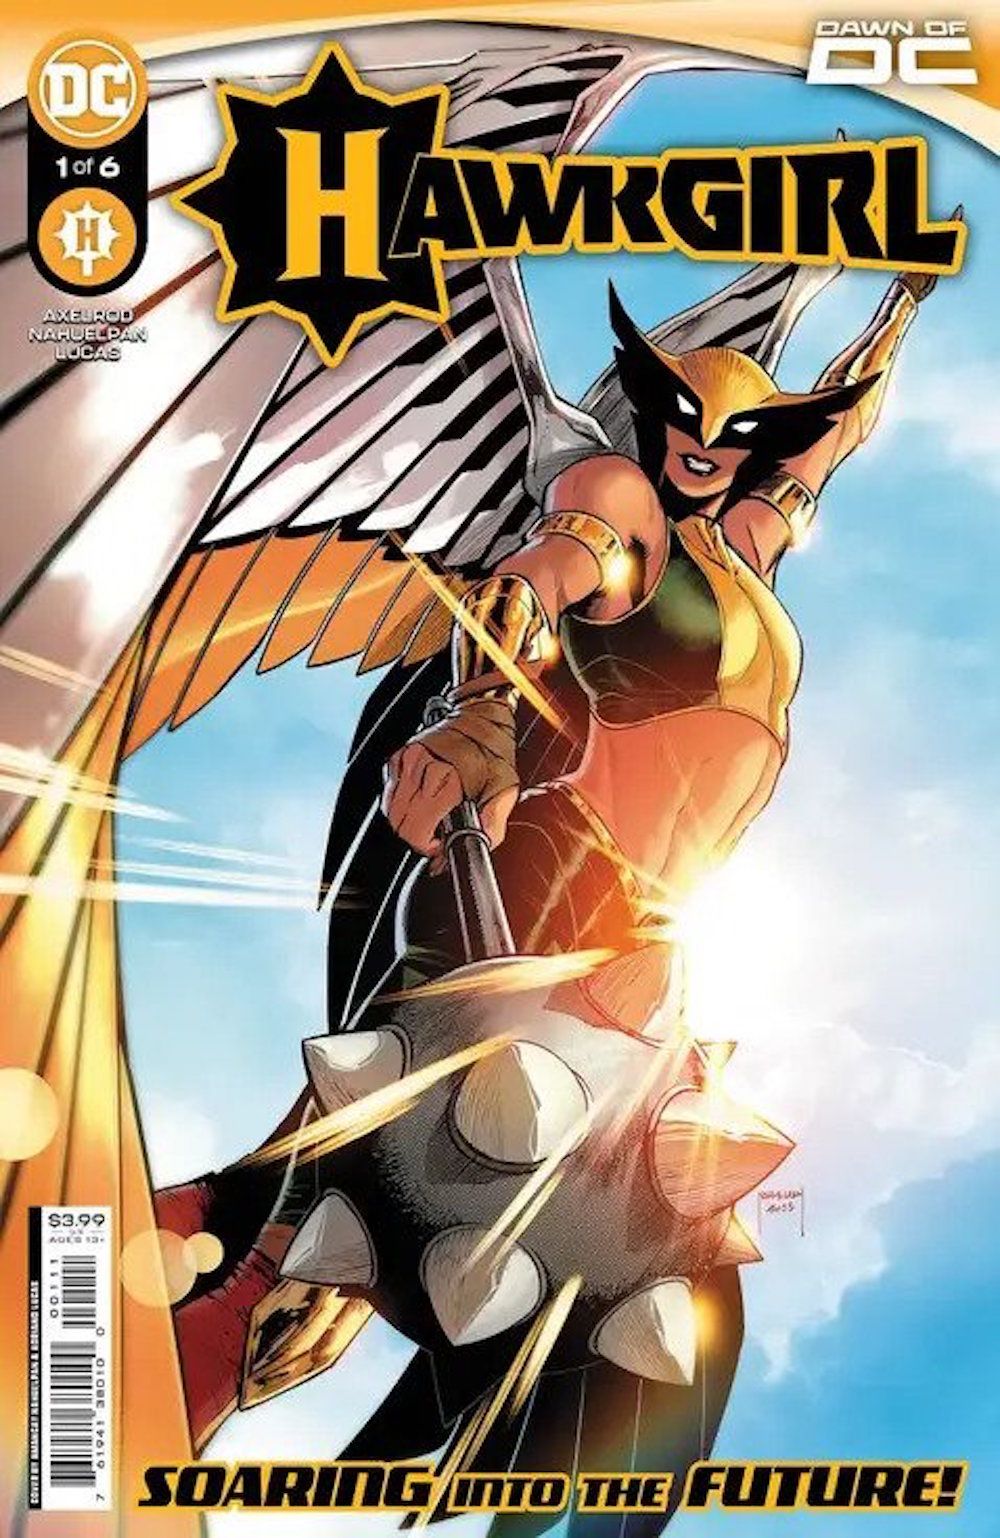 The cover of Hawkgirl #1, Kendra Saunders's Hawkgirl flying in the sky, her wing framing the cover.